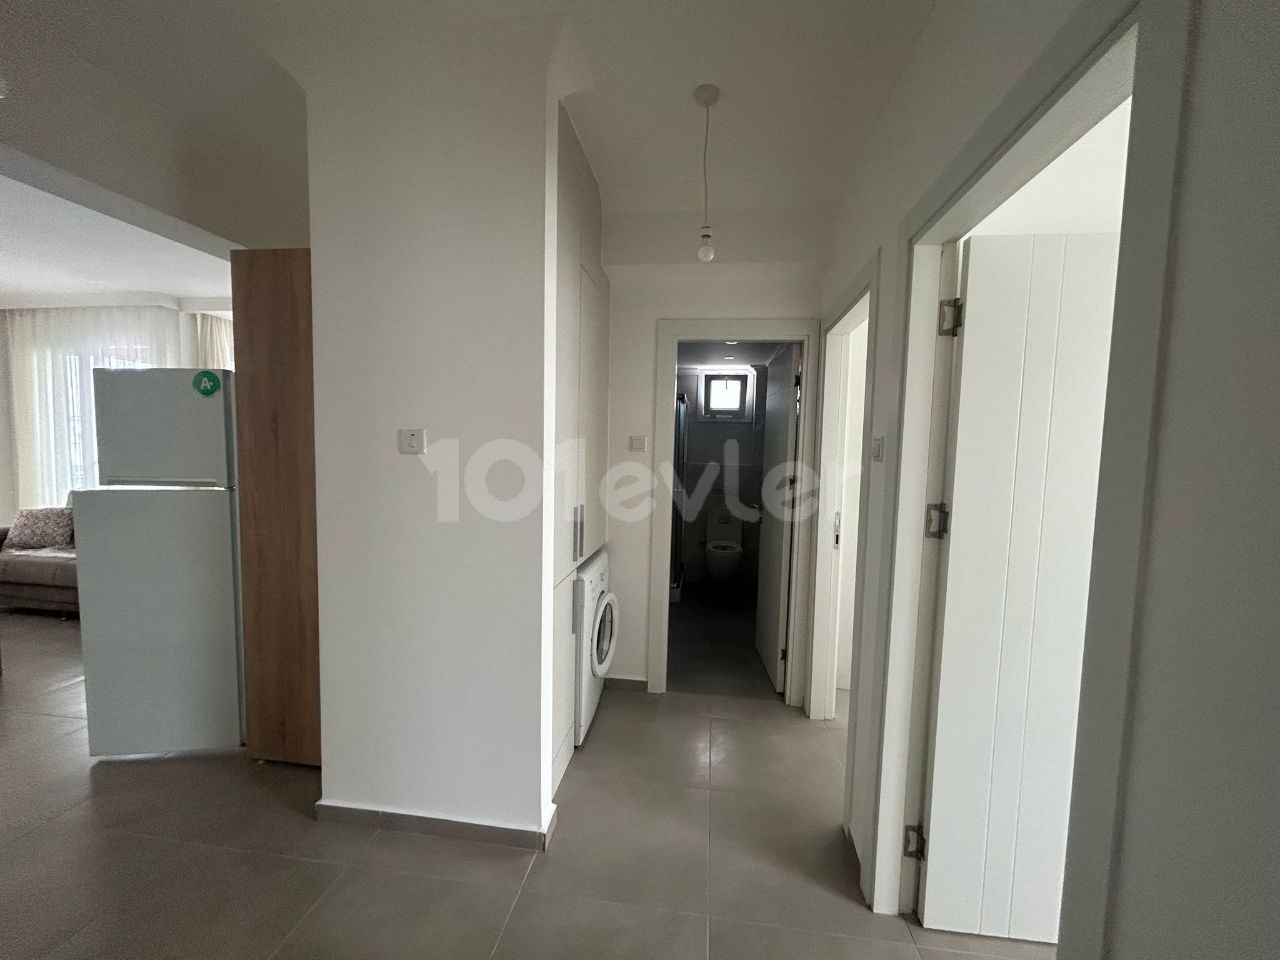 2+1 flat for rent within walking distance to all amenities near Kyrenia Central Kar Market